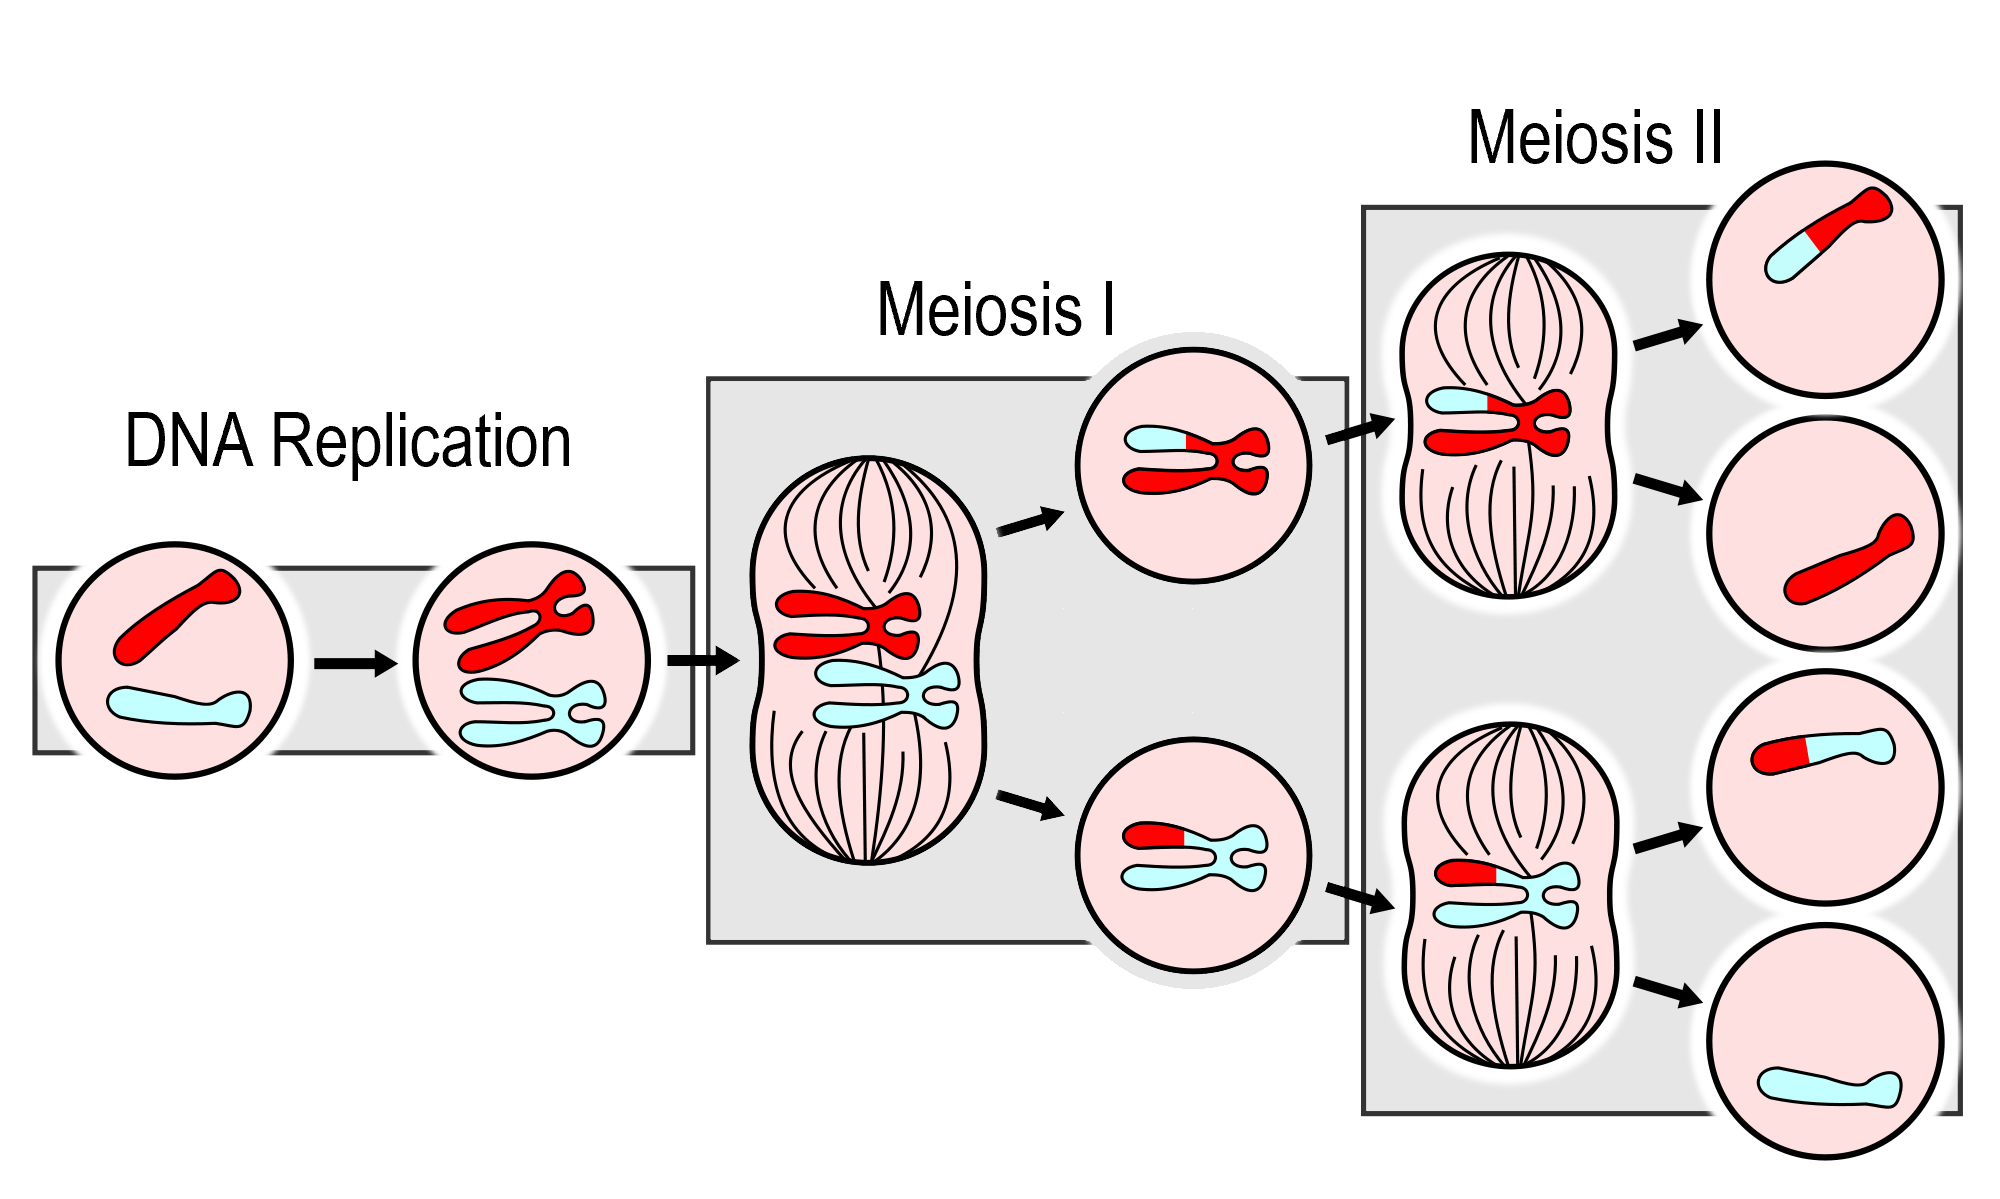 Image shows the major events in Meiosis